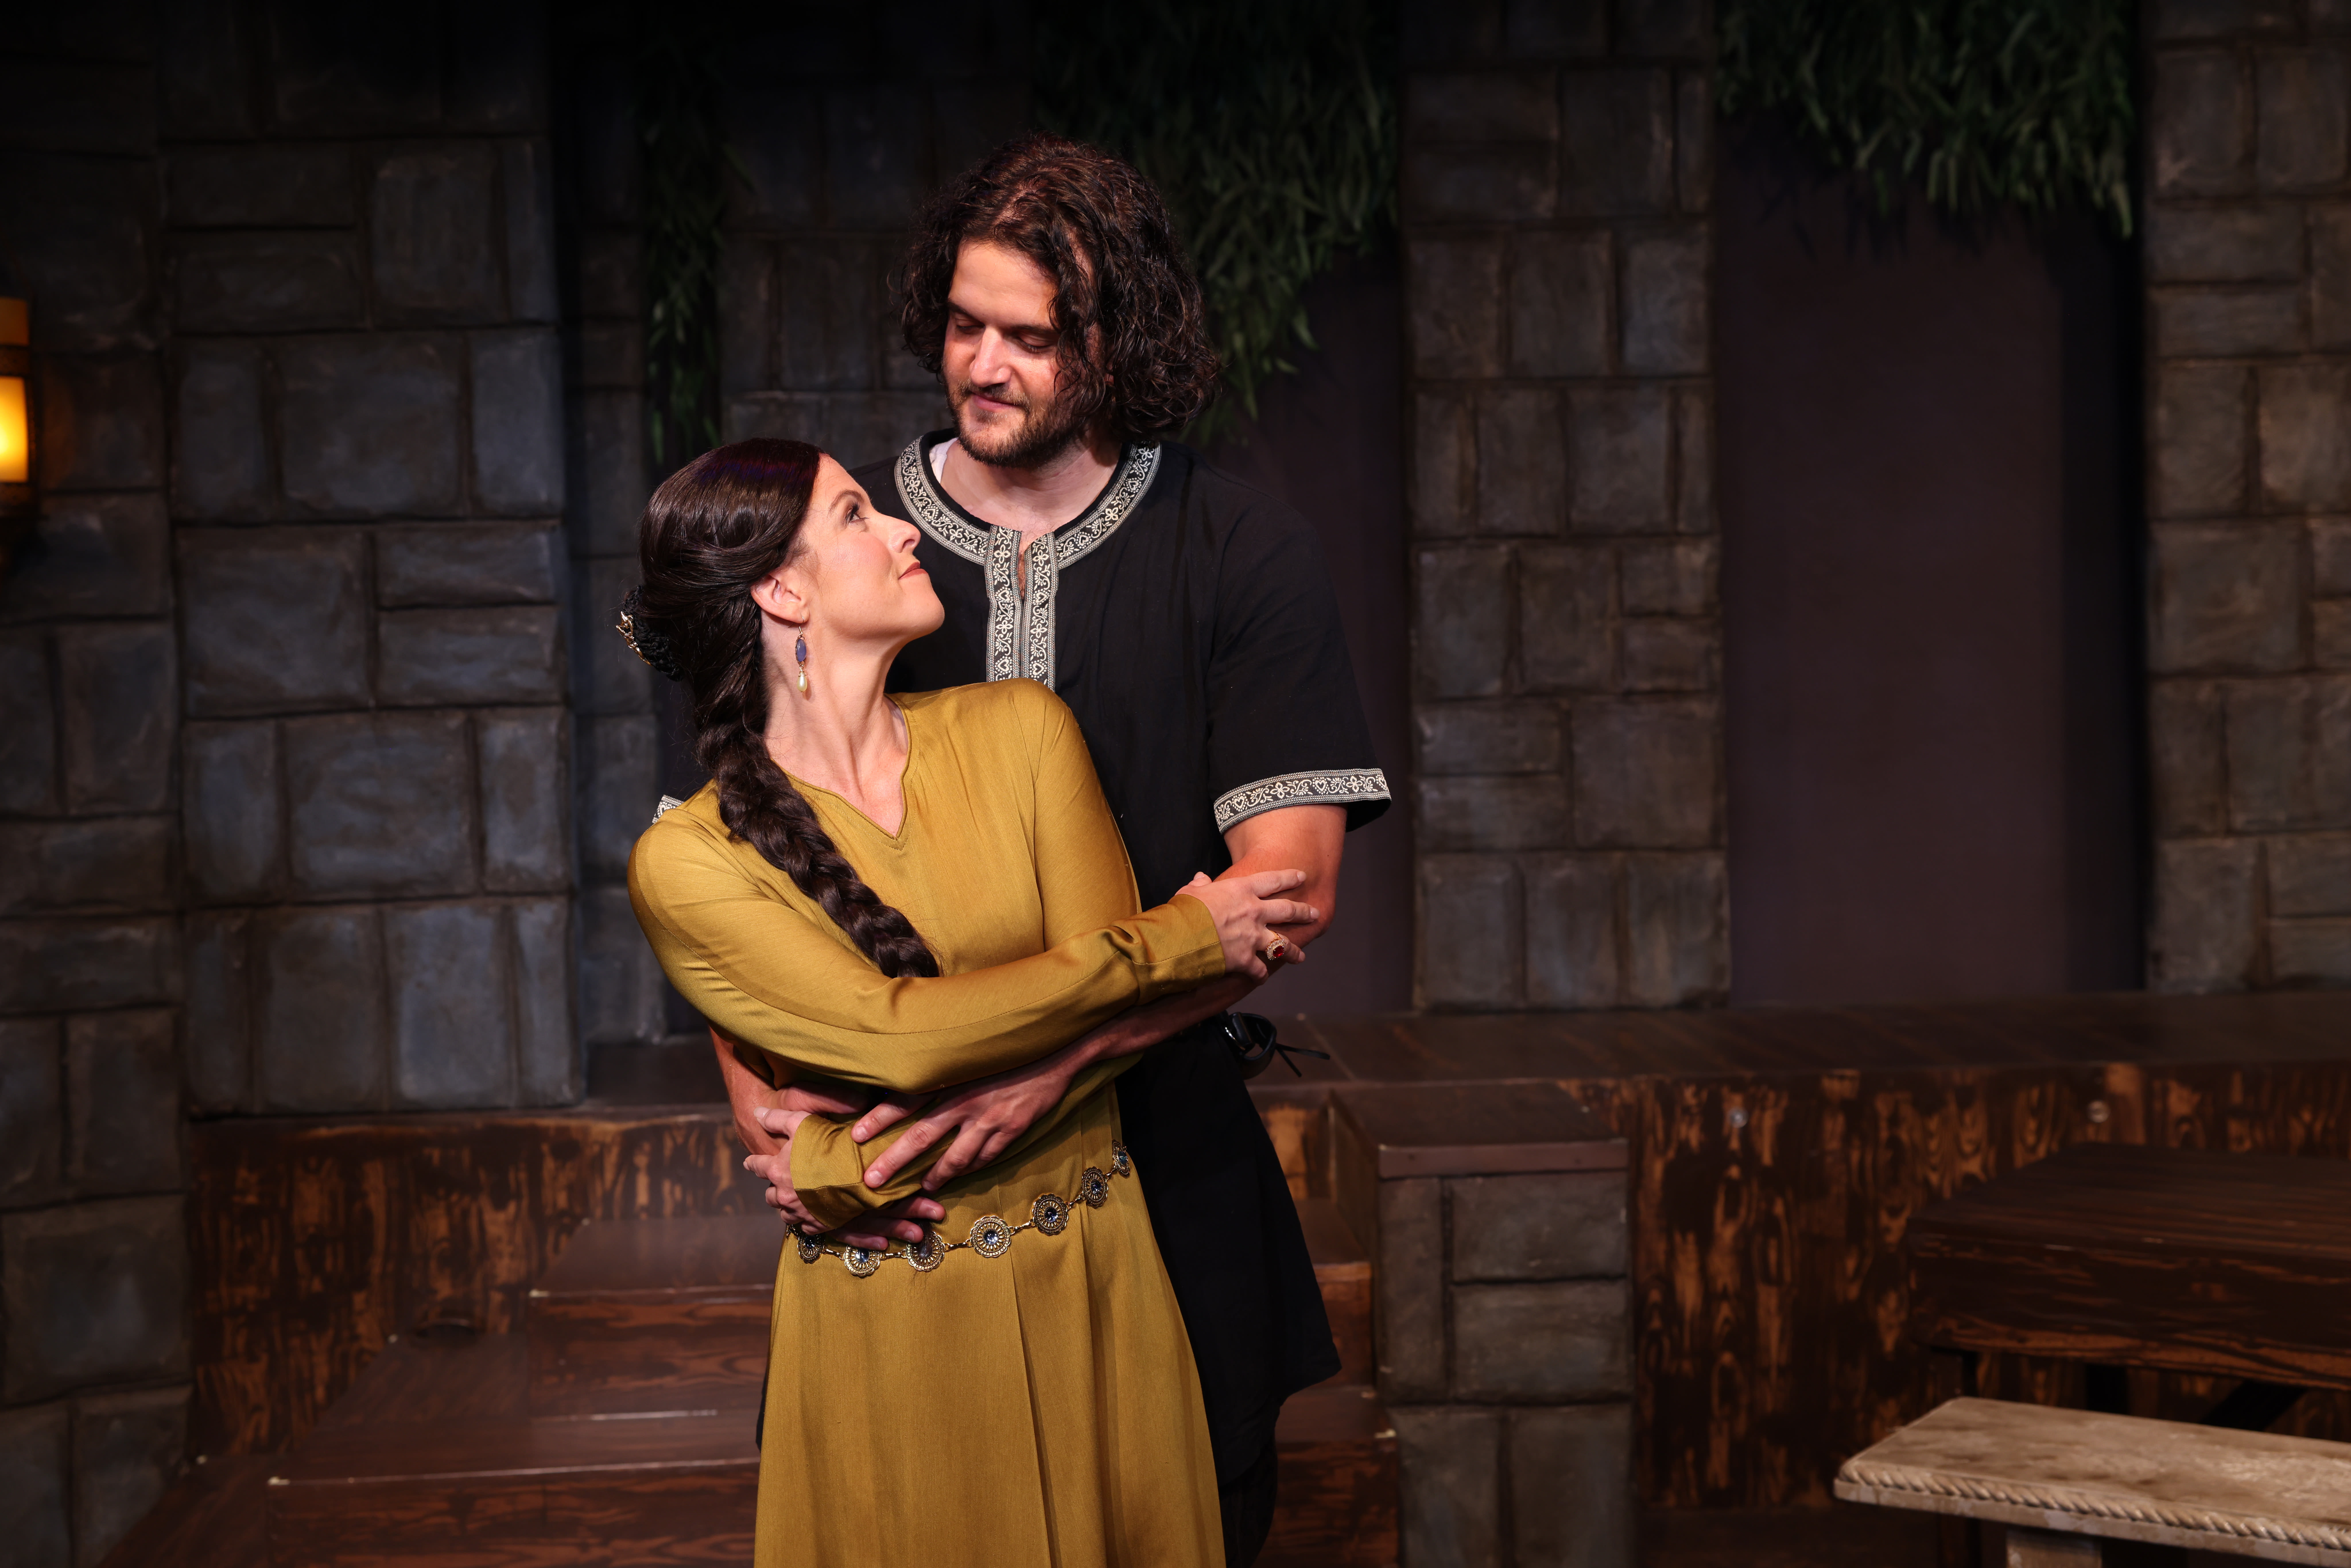 Review: Even on a small stage, North Coast Rep's 'Camelot' really sings